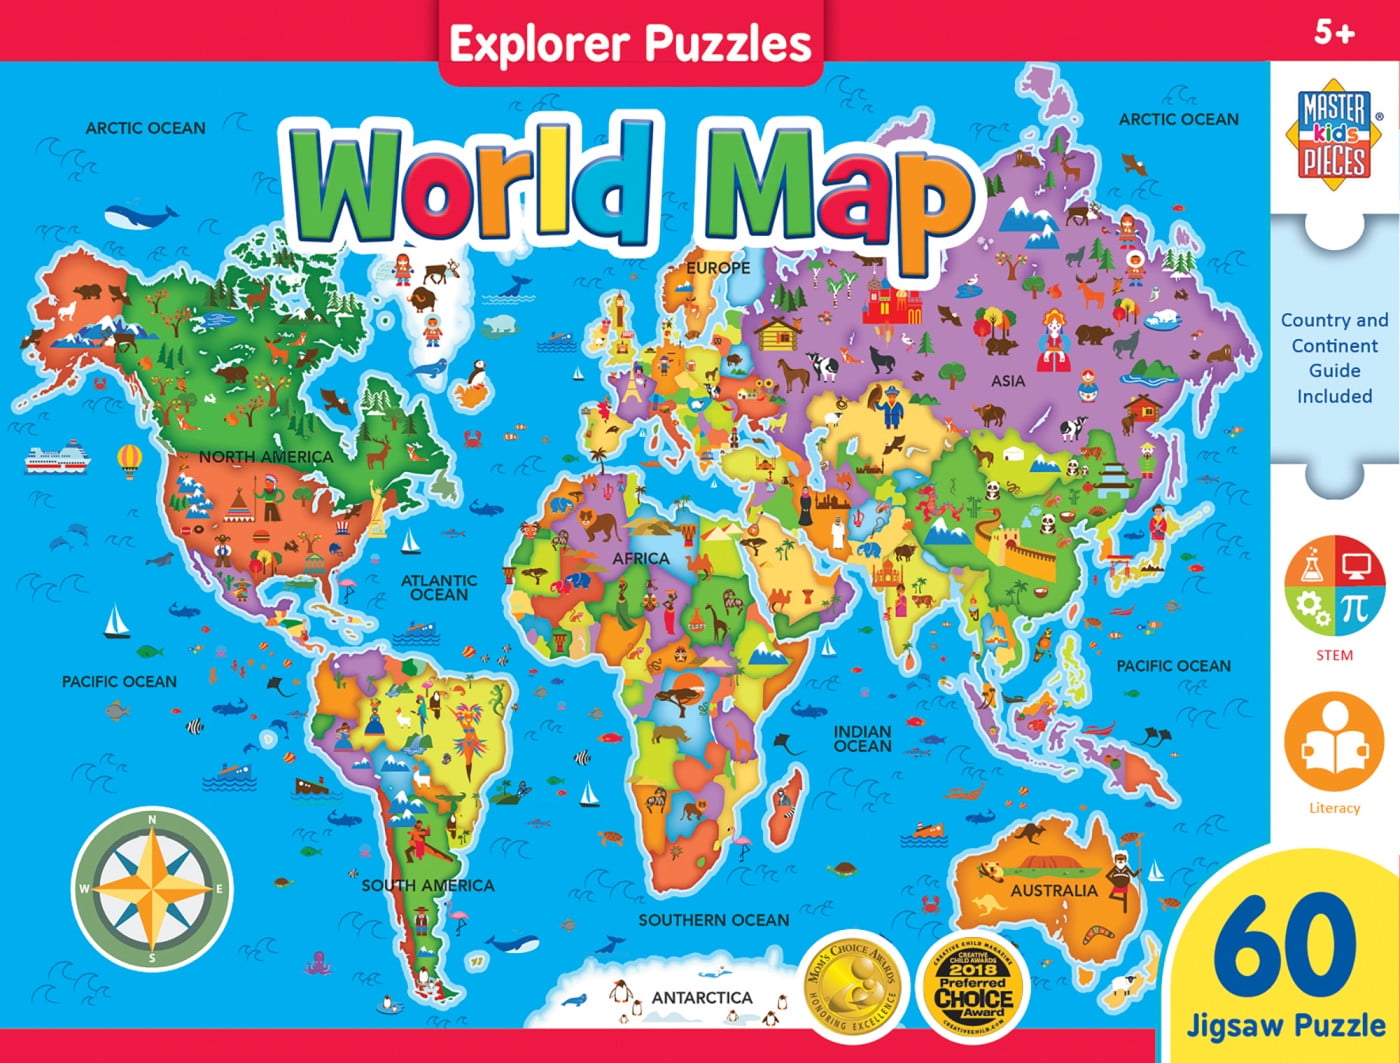 Puzzle Map of North America Dtoys-76779 1000 pieces Jigsaw Puzzles - World  Maps and Mappemonde - Jigsaw Puzzle